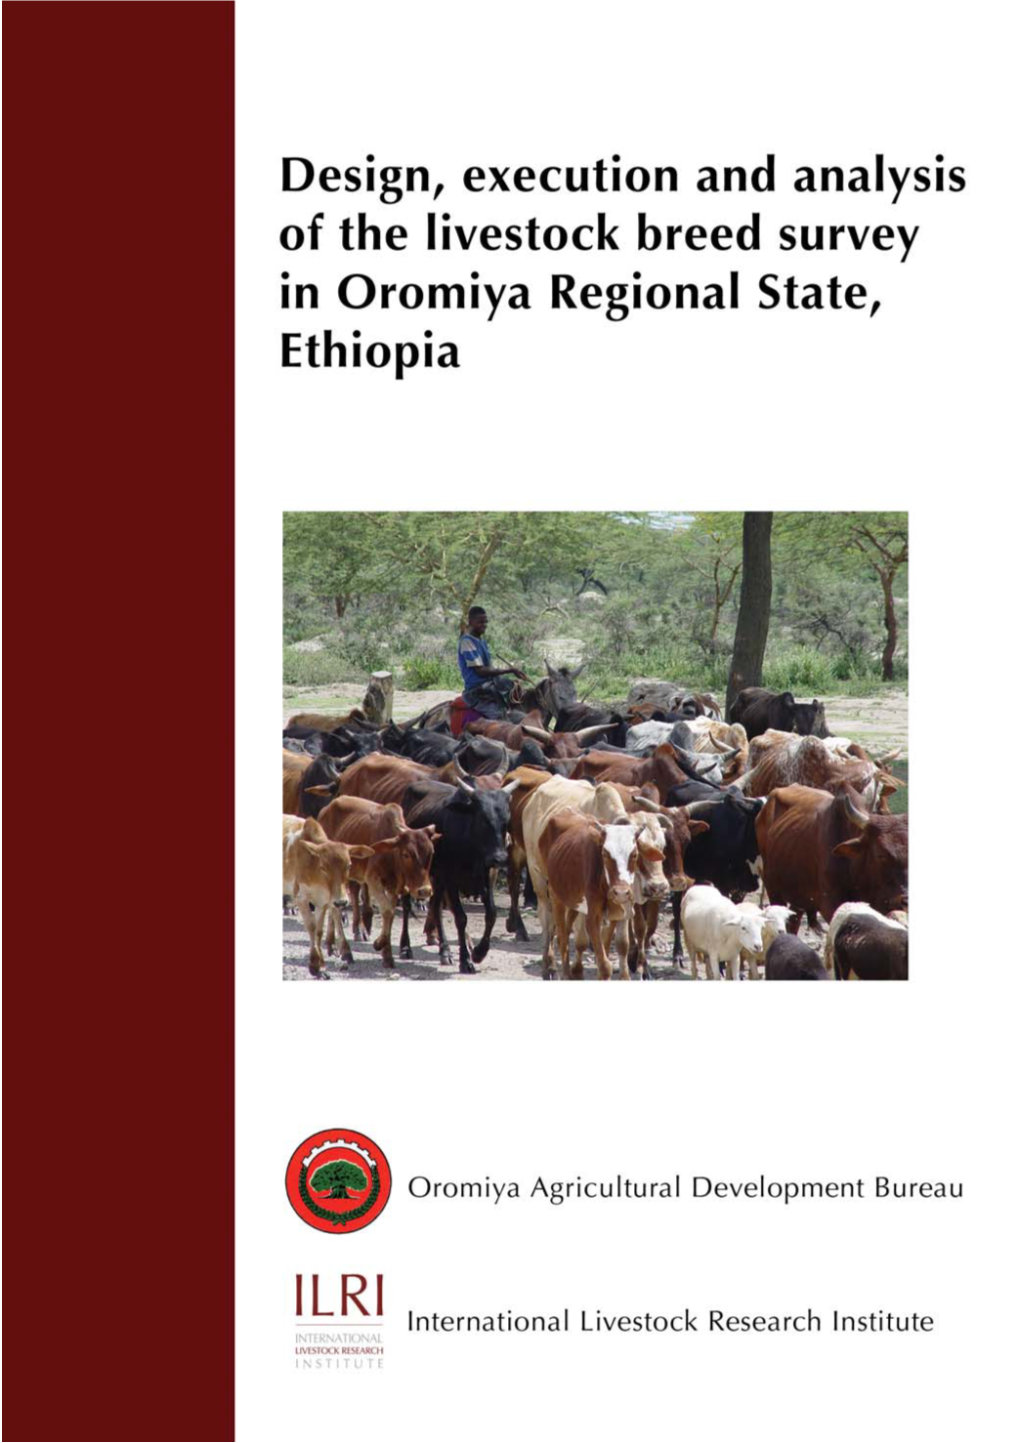 Design, Execution and Analysis of the Livestock Breed Survey in Oromiya Regional State, Ethiopia